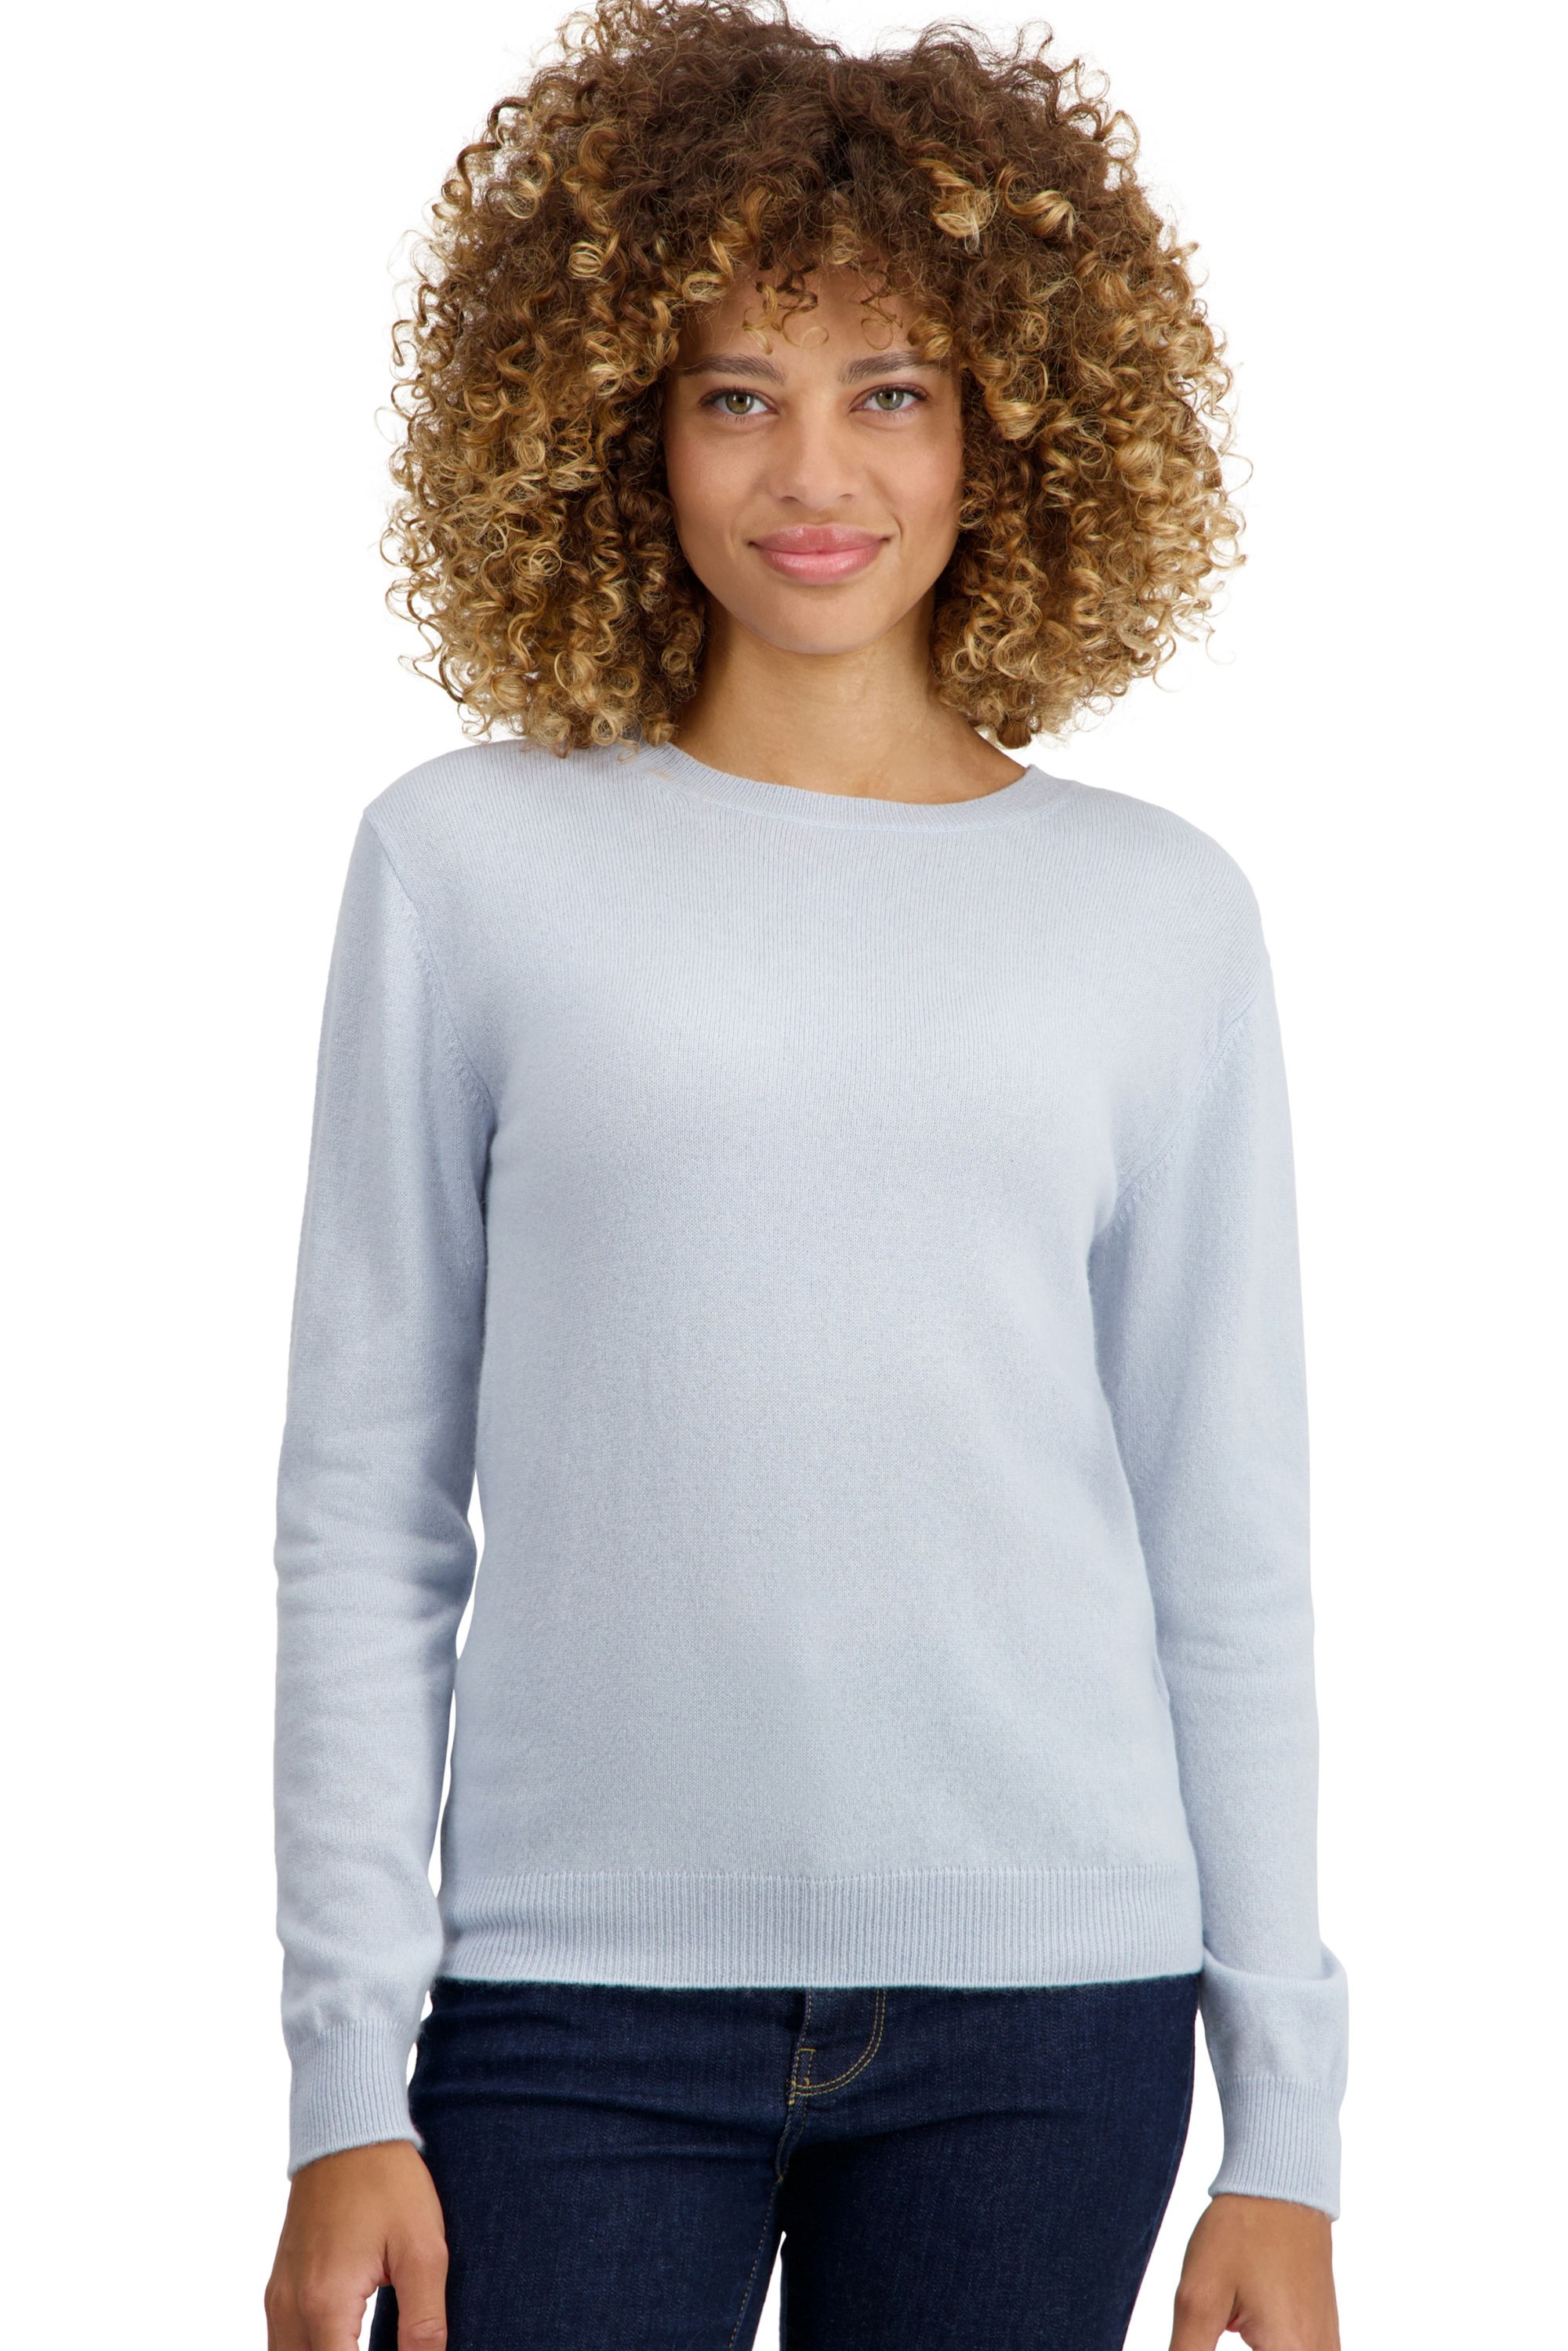 Cashmere ladies basic sweaters at low prices thalia first whisper s